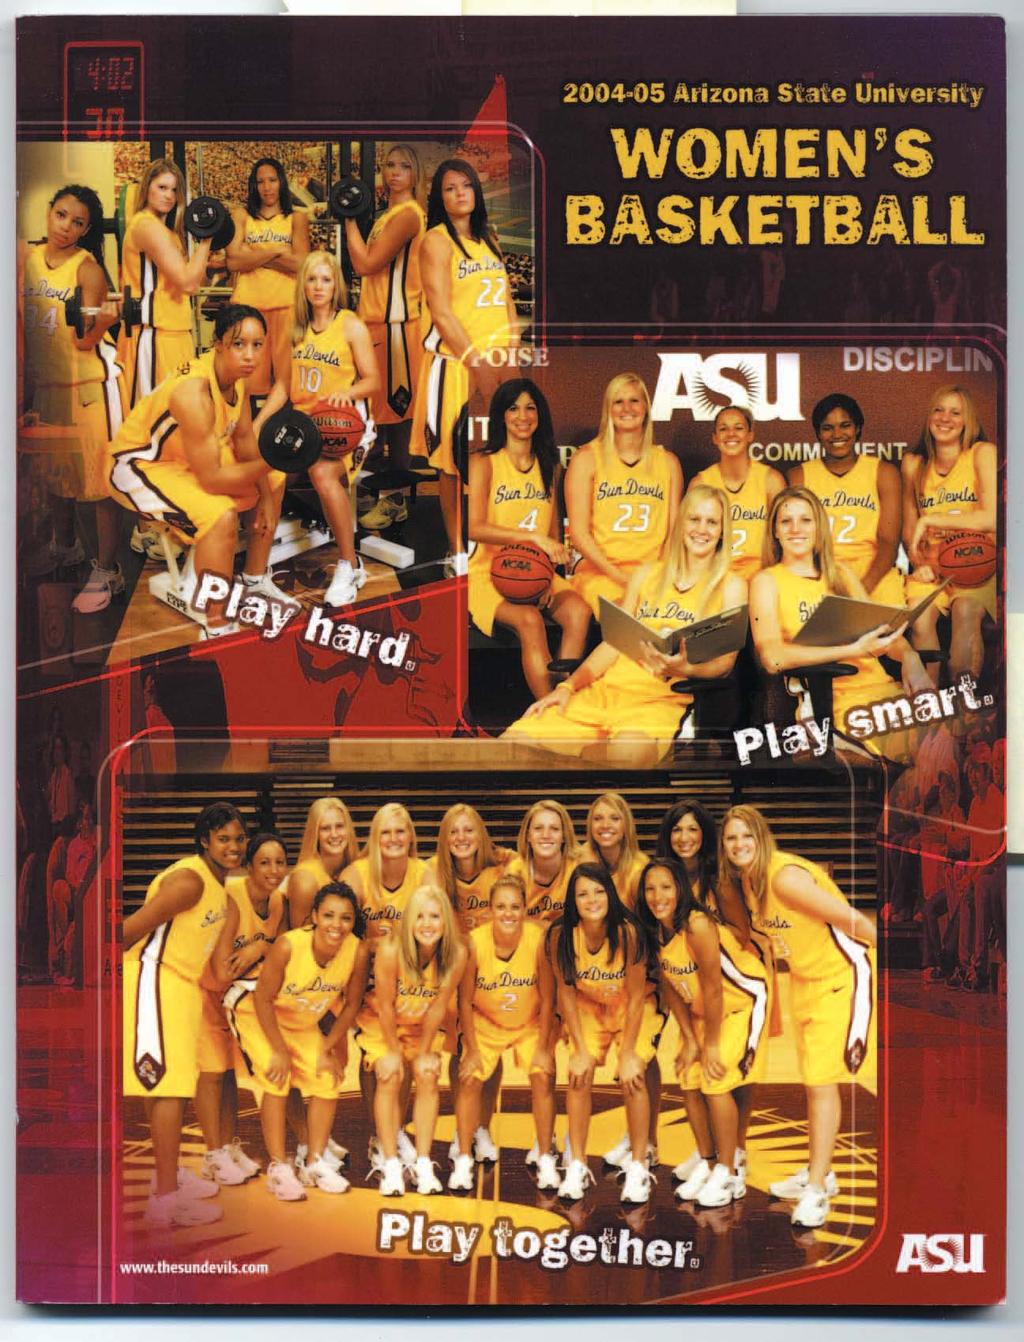 Create an advertising campaign that incorporates the five attributes of women s college basketball that attract fans to attend games.